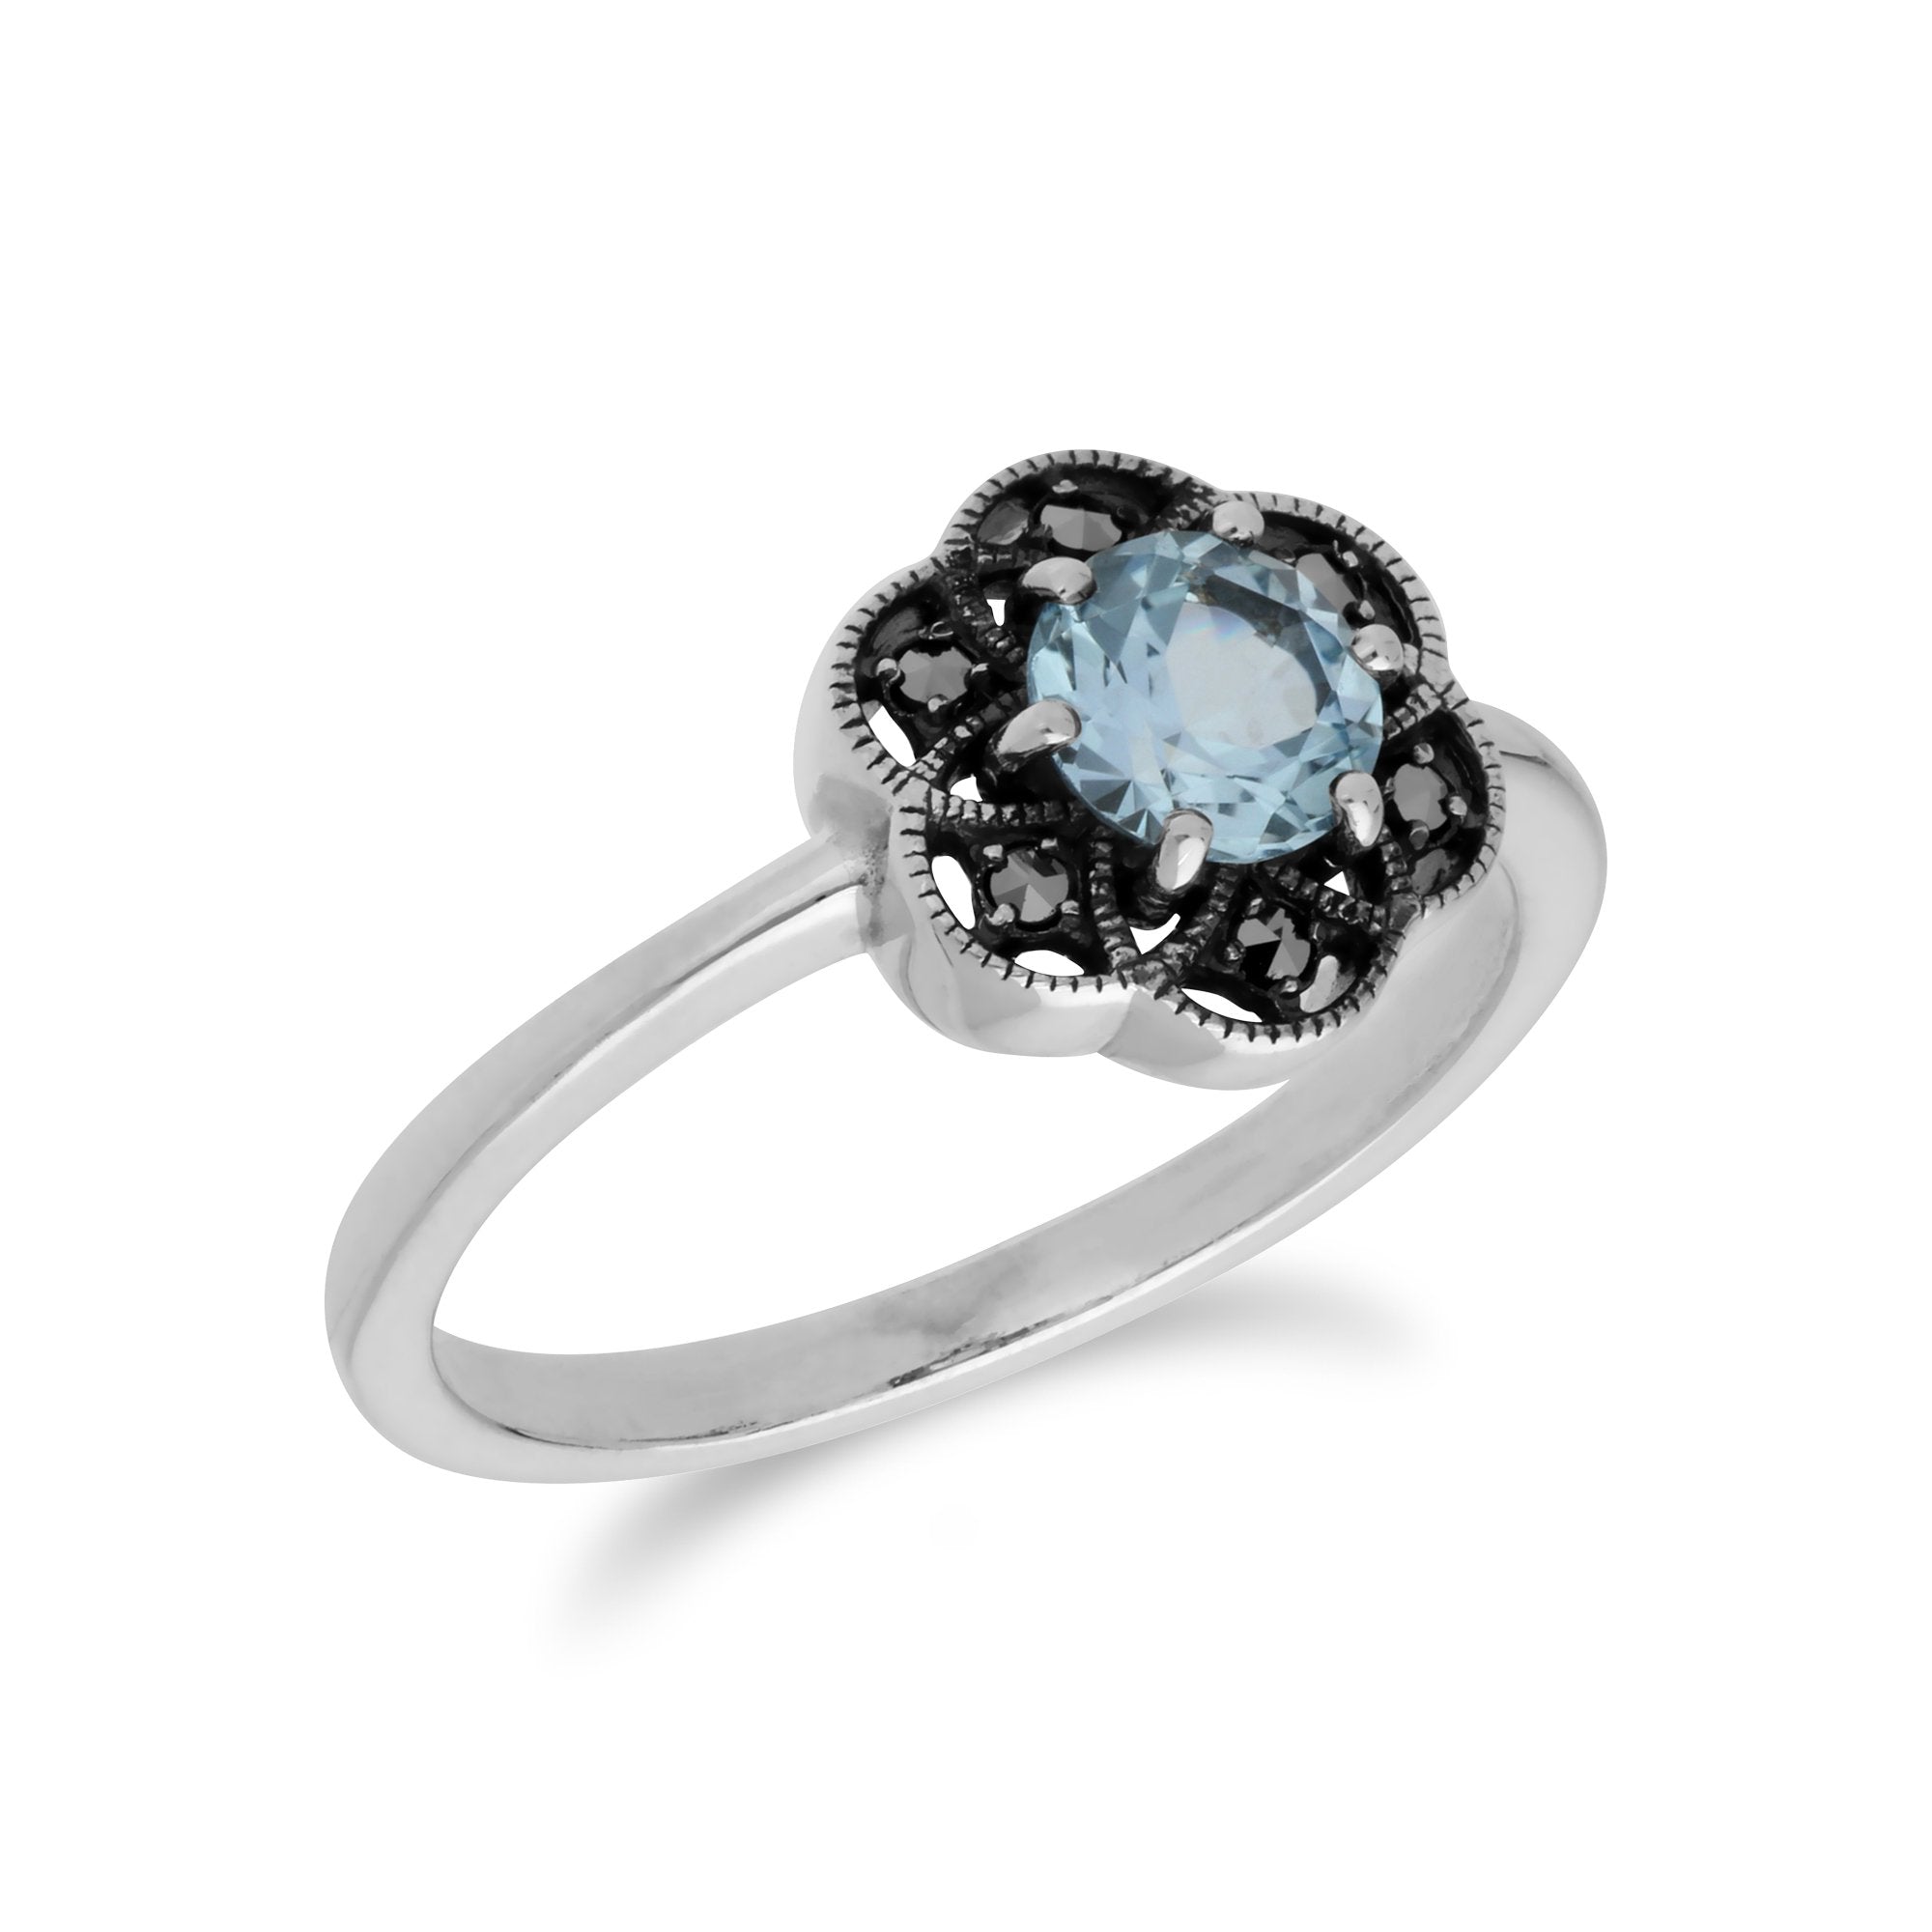 Floral Round Blue Topaz & Marcasite Daisy Ring in 925 Sterling Silver